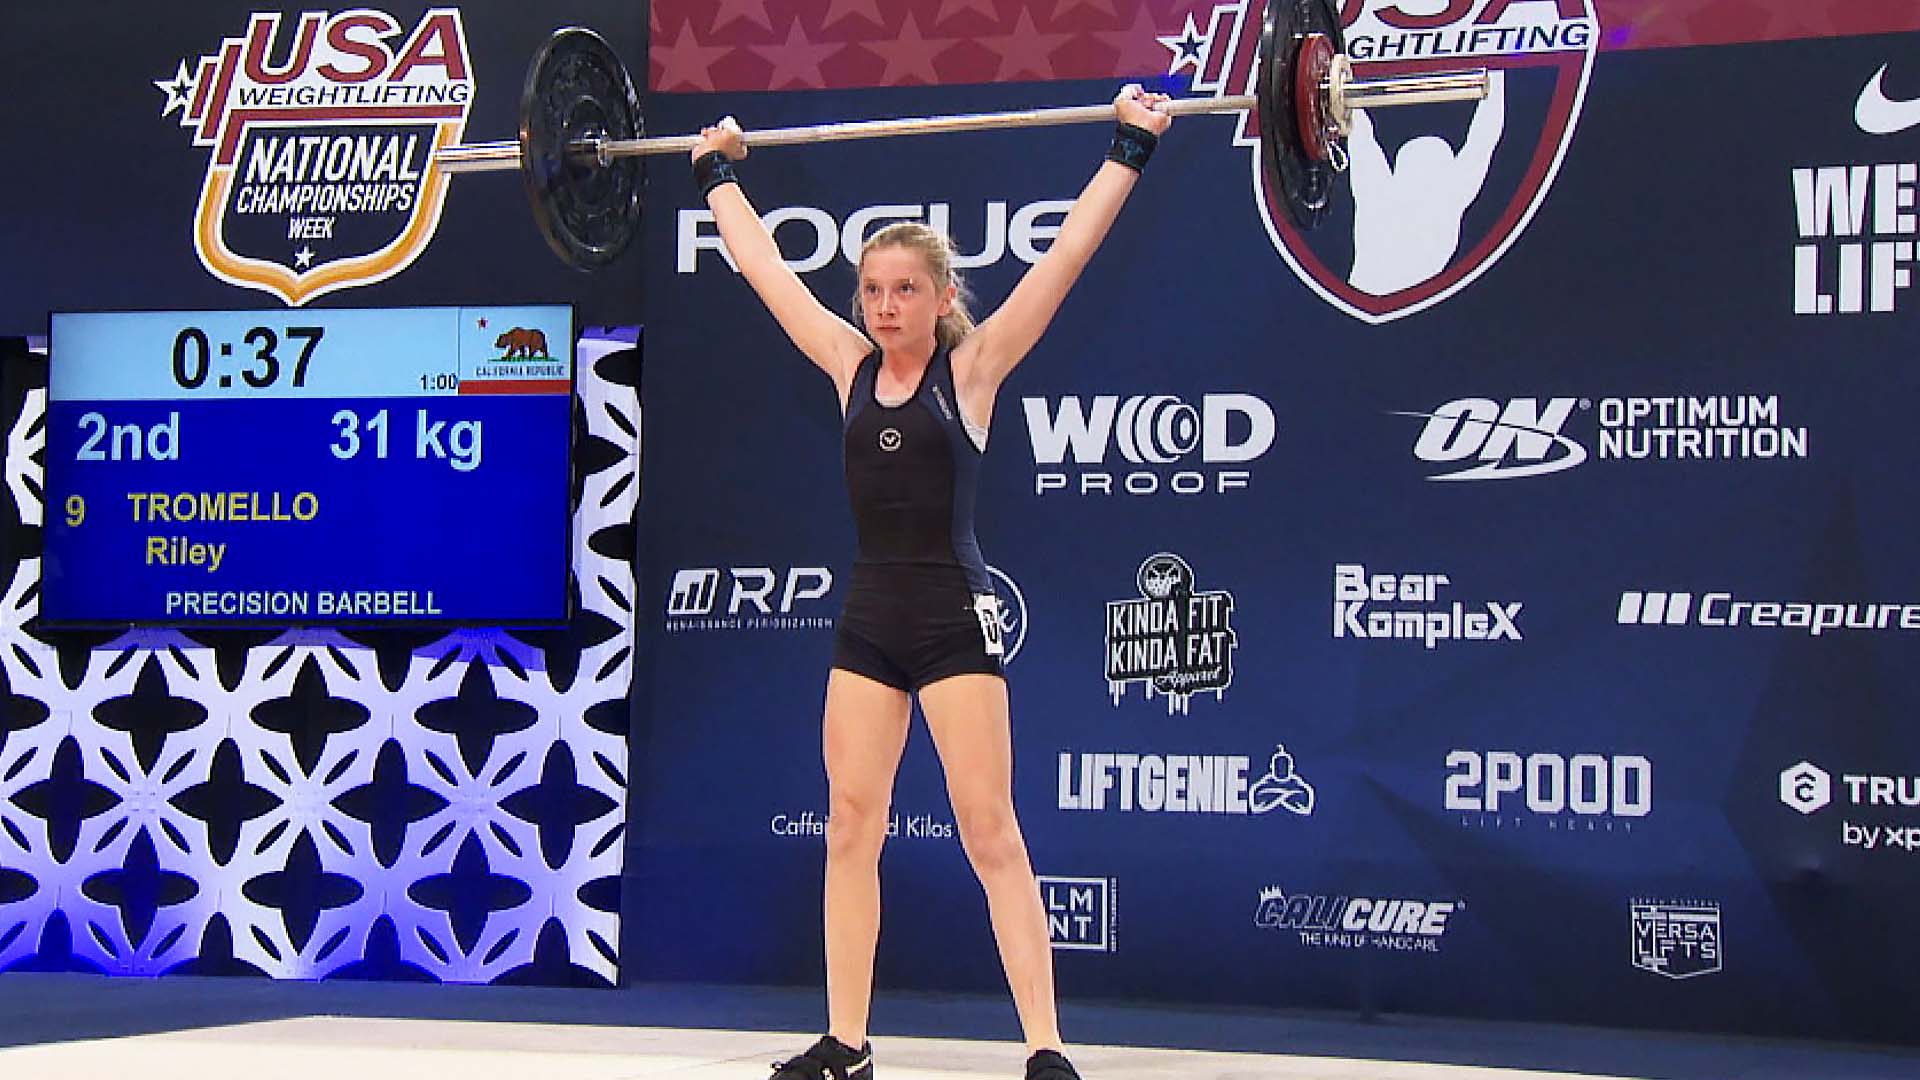 Meet the Girls, 9 and 10, Who Won at USA Weightlifting Championship Inside Edition